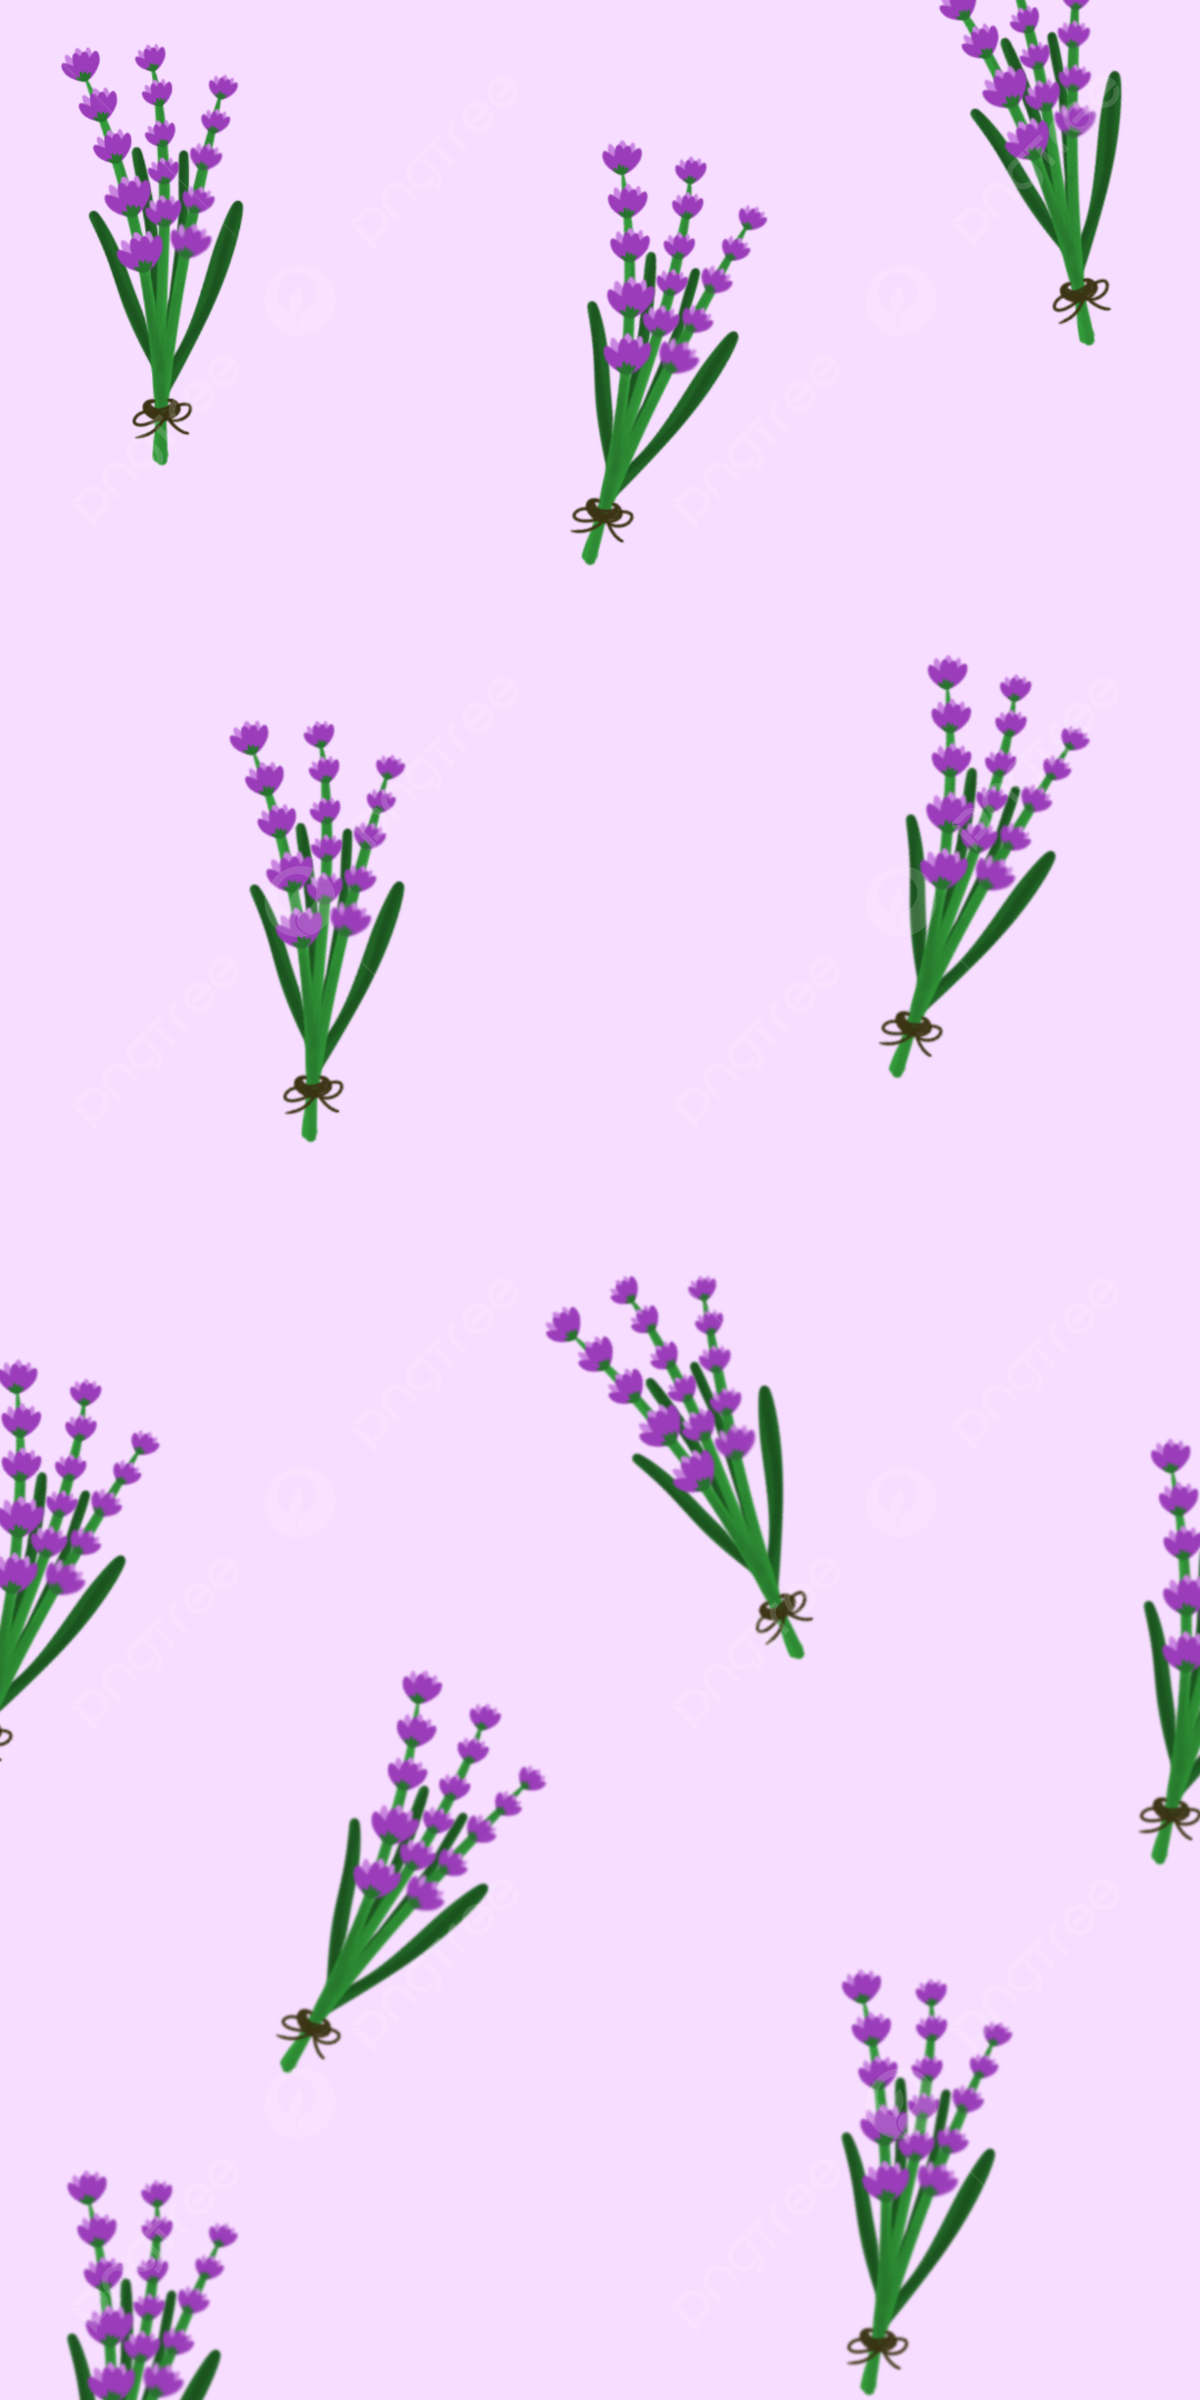 Lavender bouquet aesthetic wallpaper background lavender aesthetic wallpaper bouquet background image for free download